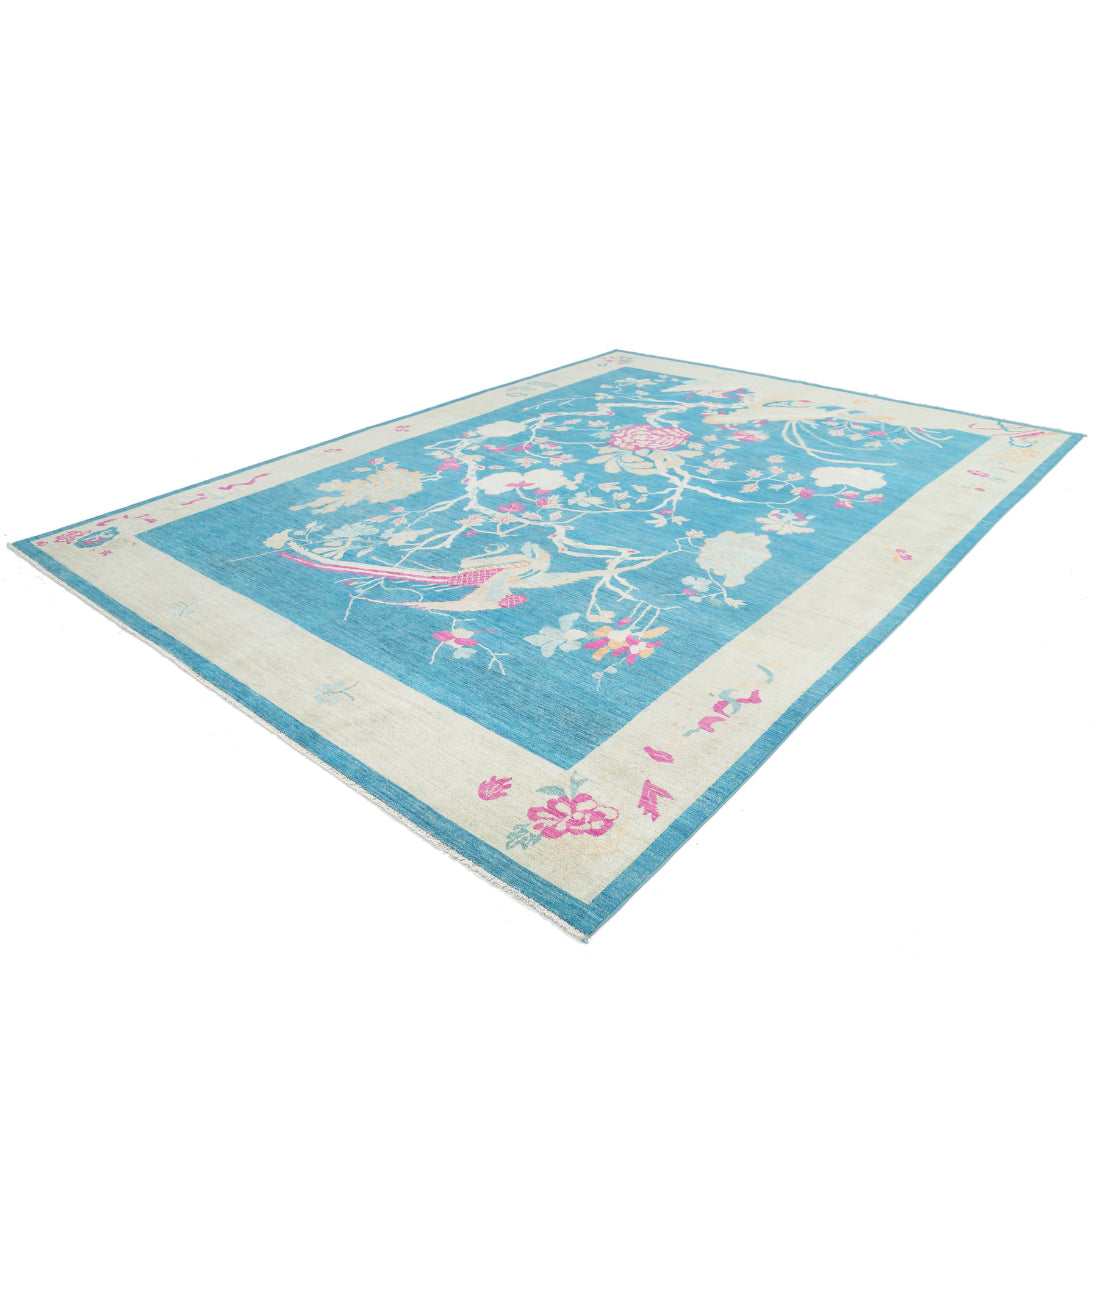 Hand Knotted Chinese Wool Rug - 10'2'' x 13'8'' 10'2'' x 13'8'' (305 X 410) / Blue / Ivory